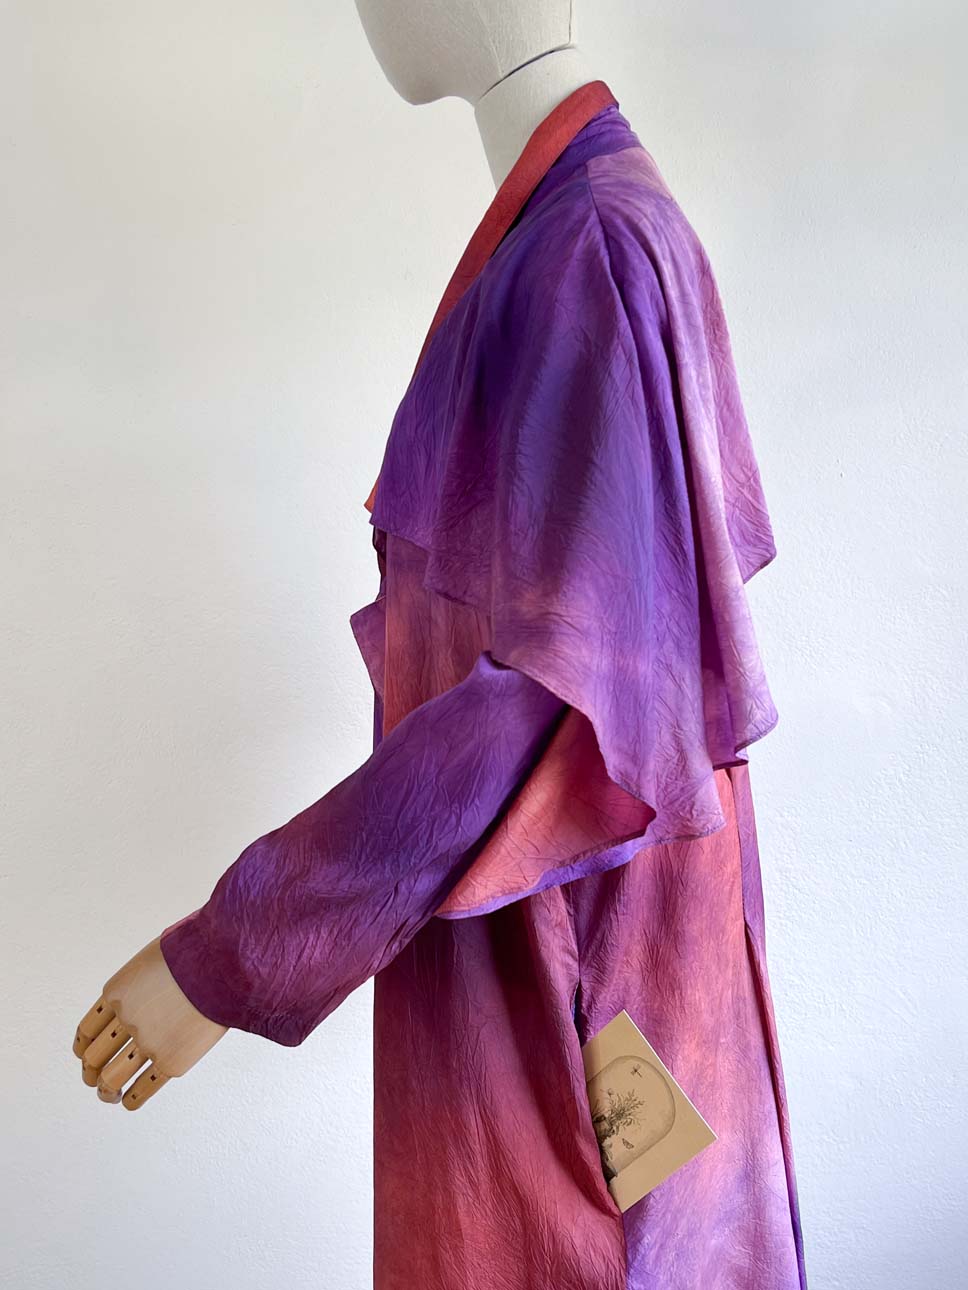 Vintage 1980s Jacket - Wizard-worthy! Purple + Copper Ombre Tie-Dyed Crinkle Rayon Flowy Duster w Big Shoulders Fits Many